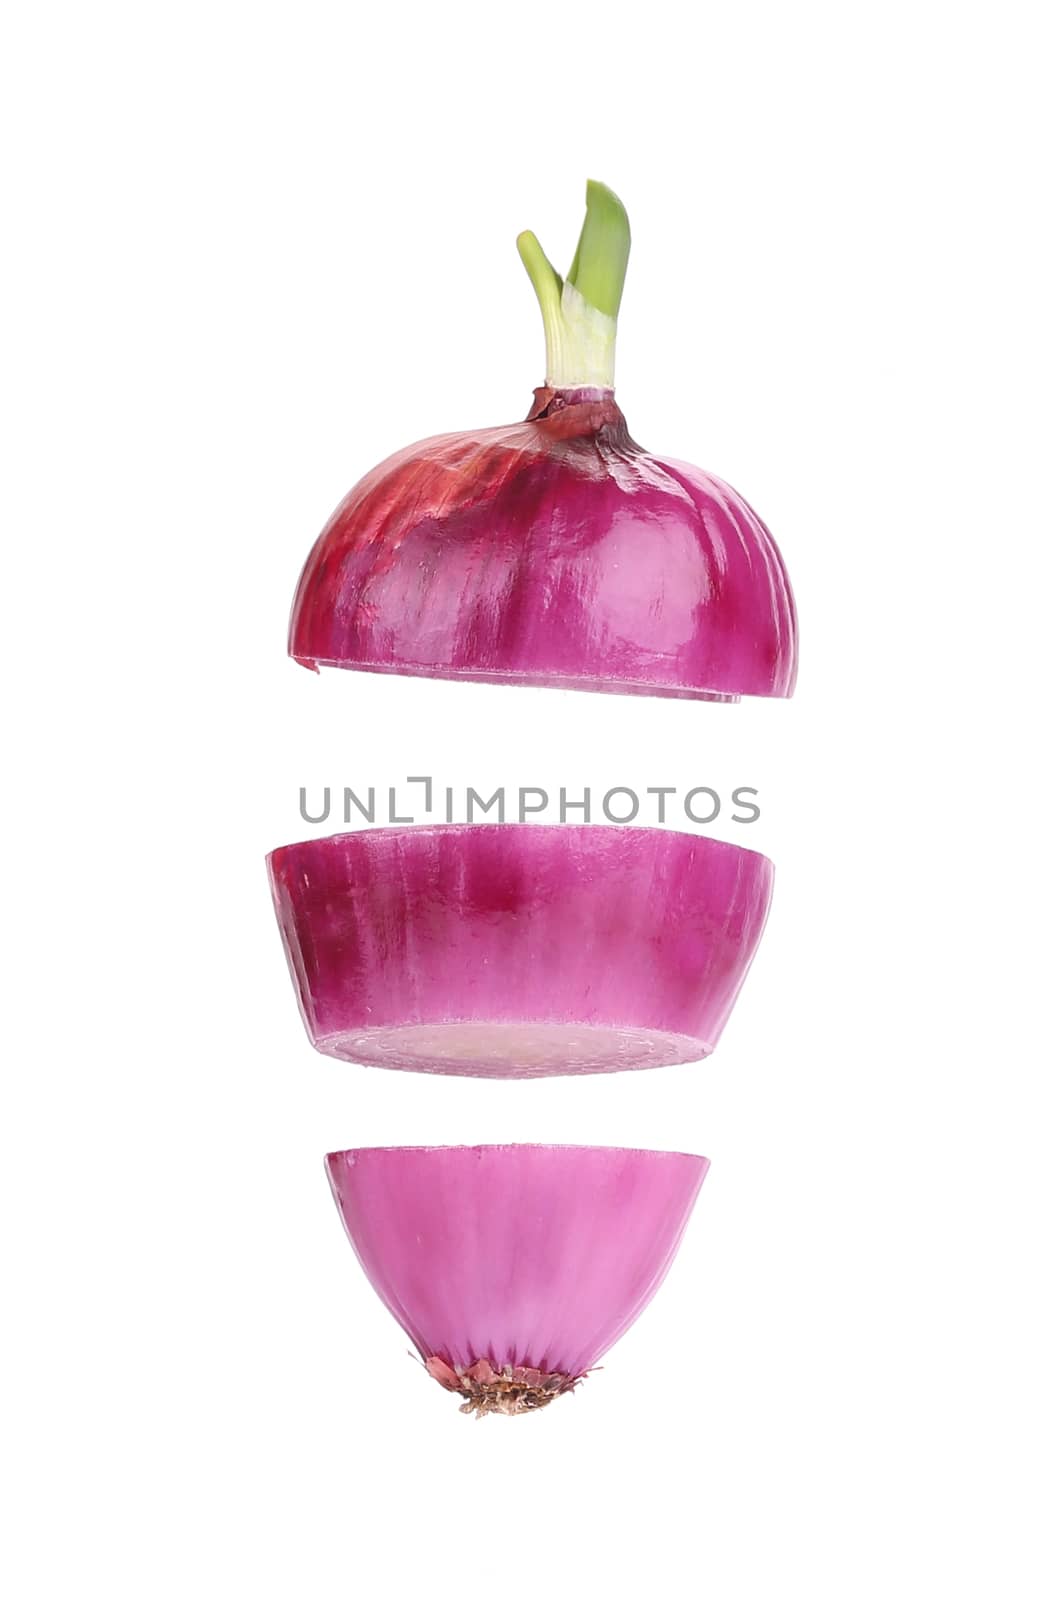 One red cut onion. Isolated on a white background.